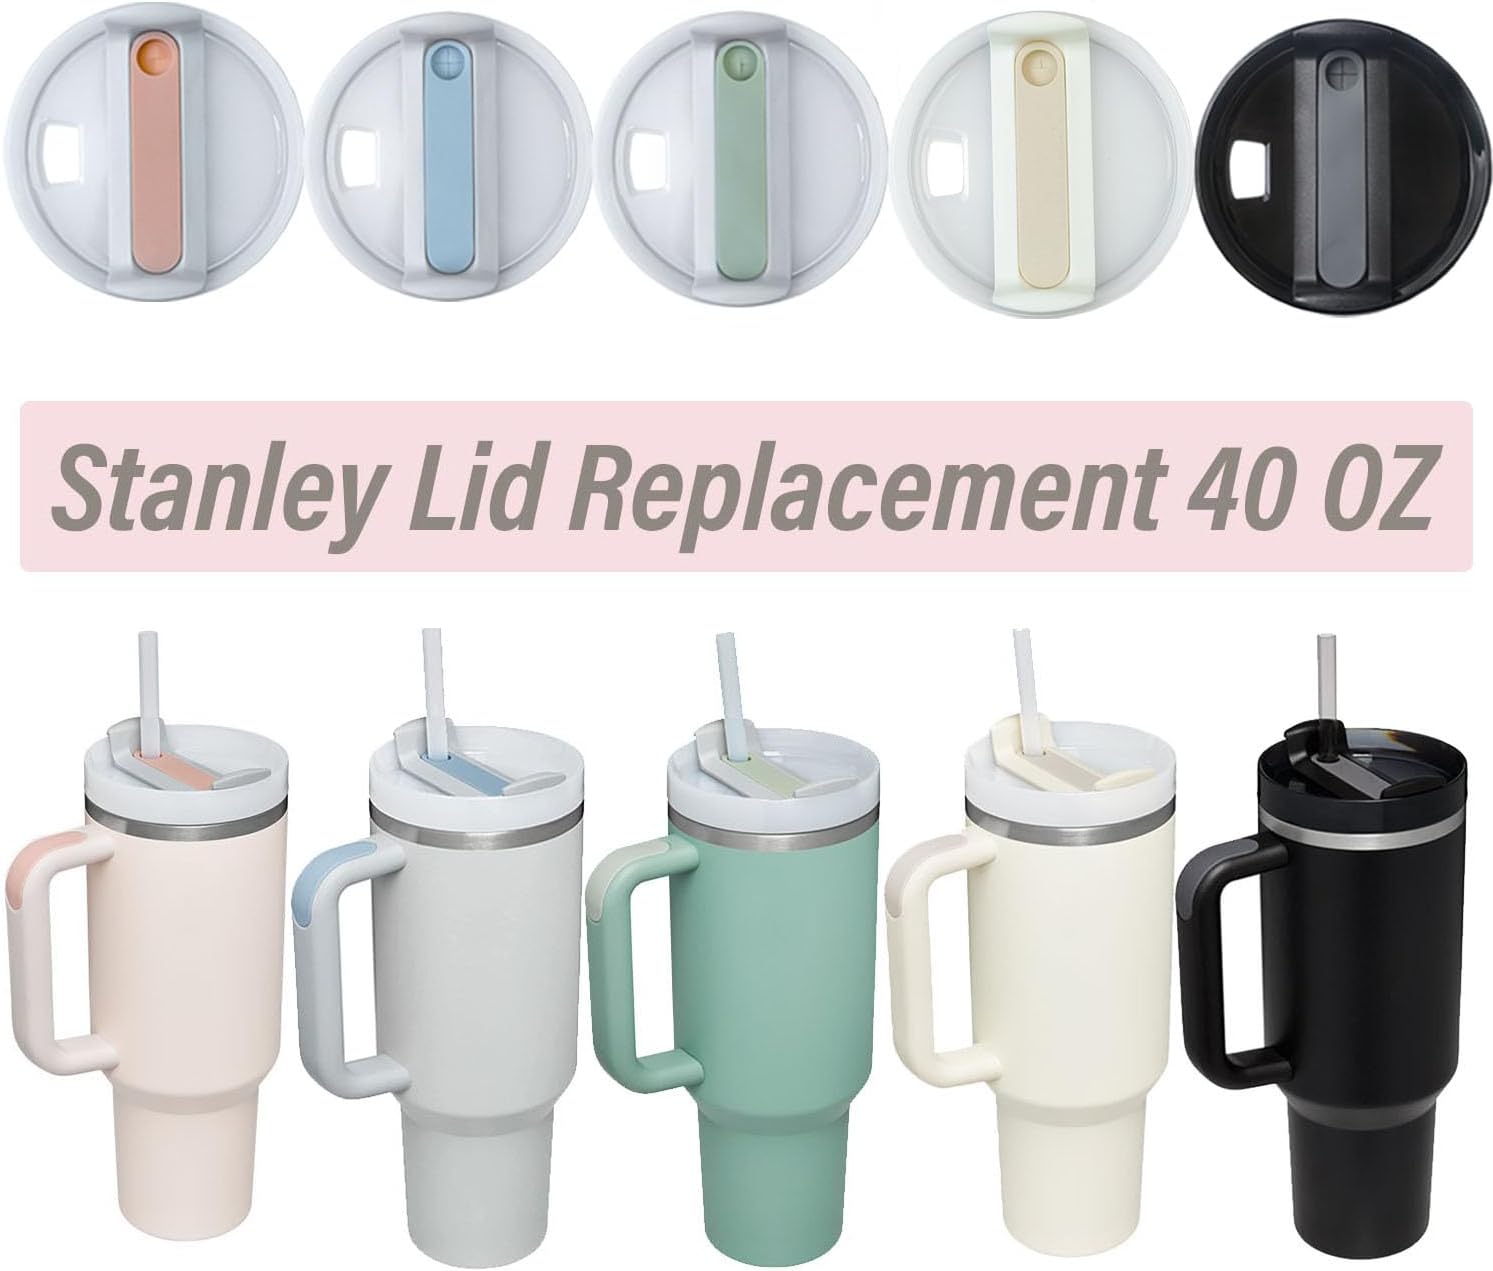 40OZ Stanley Replacement Lid